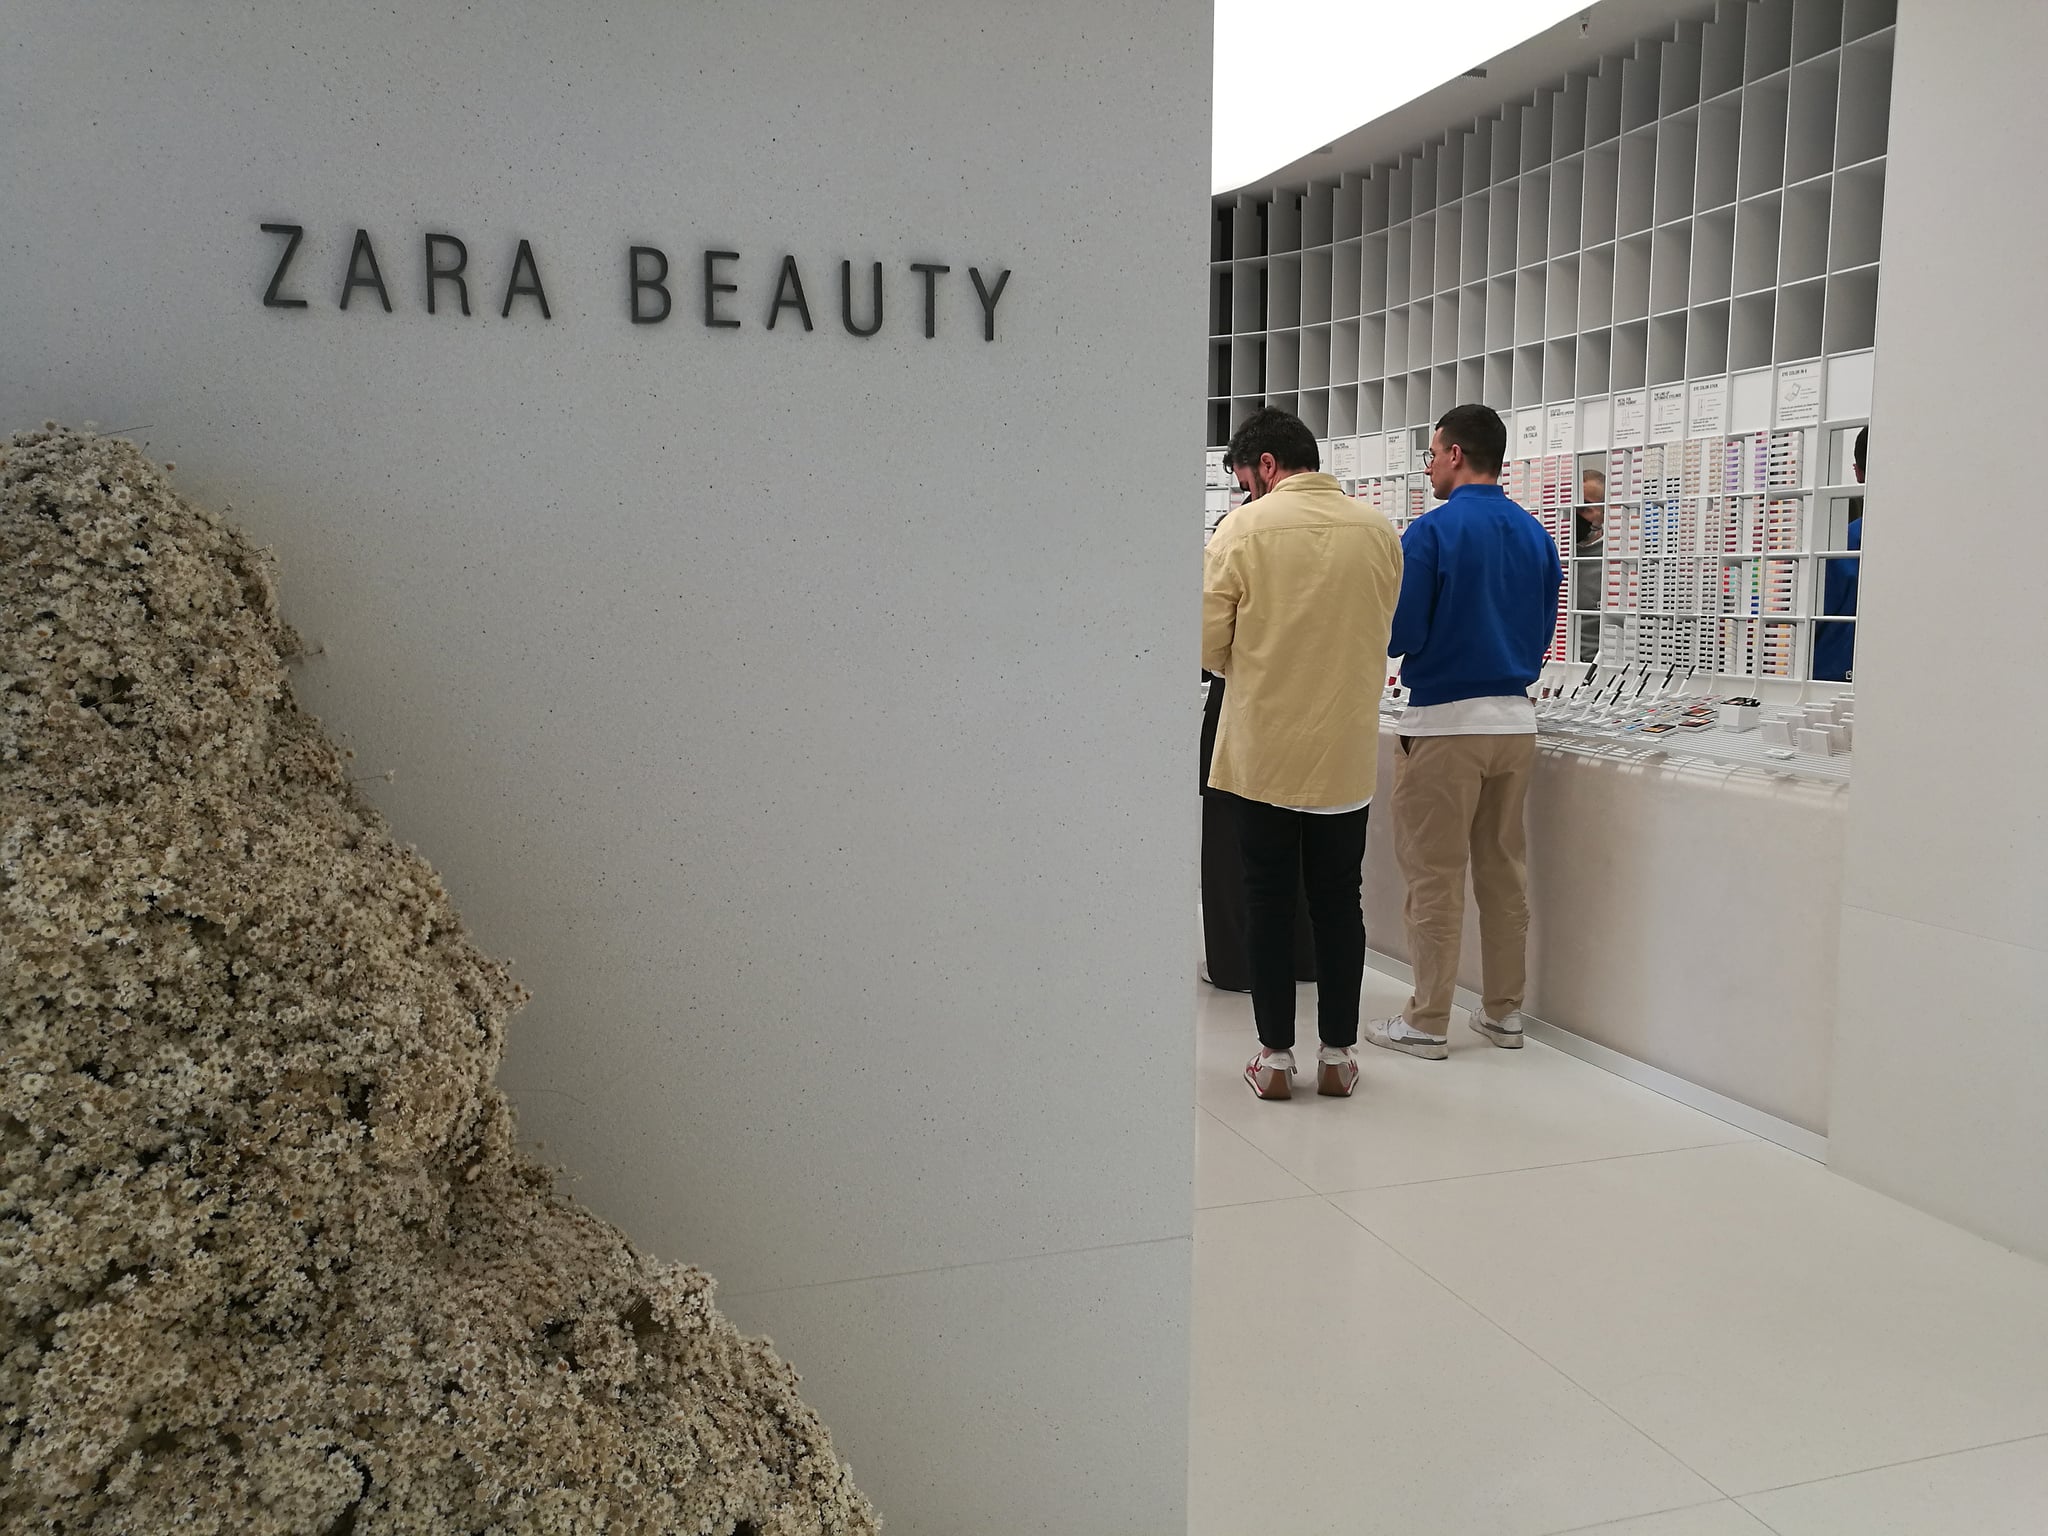 MADRID, SPAIN - APRIL 2022: Zara beauty section of the world's largest Zara store at Plaza de Espana in Madrid, Spain on April 27, 2022 (Photo by Cristina Arias/Cover/Getty Images)